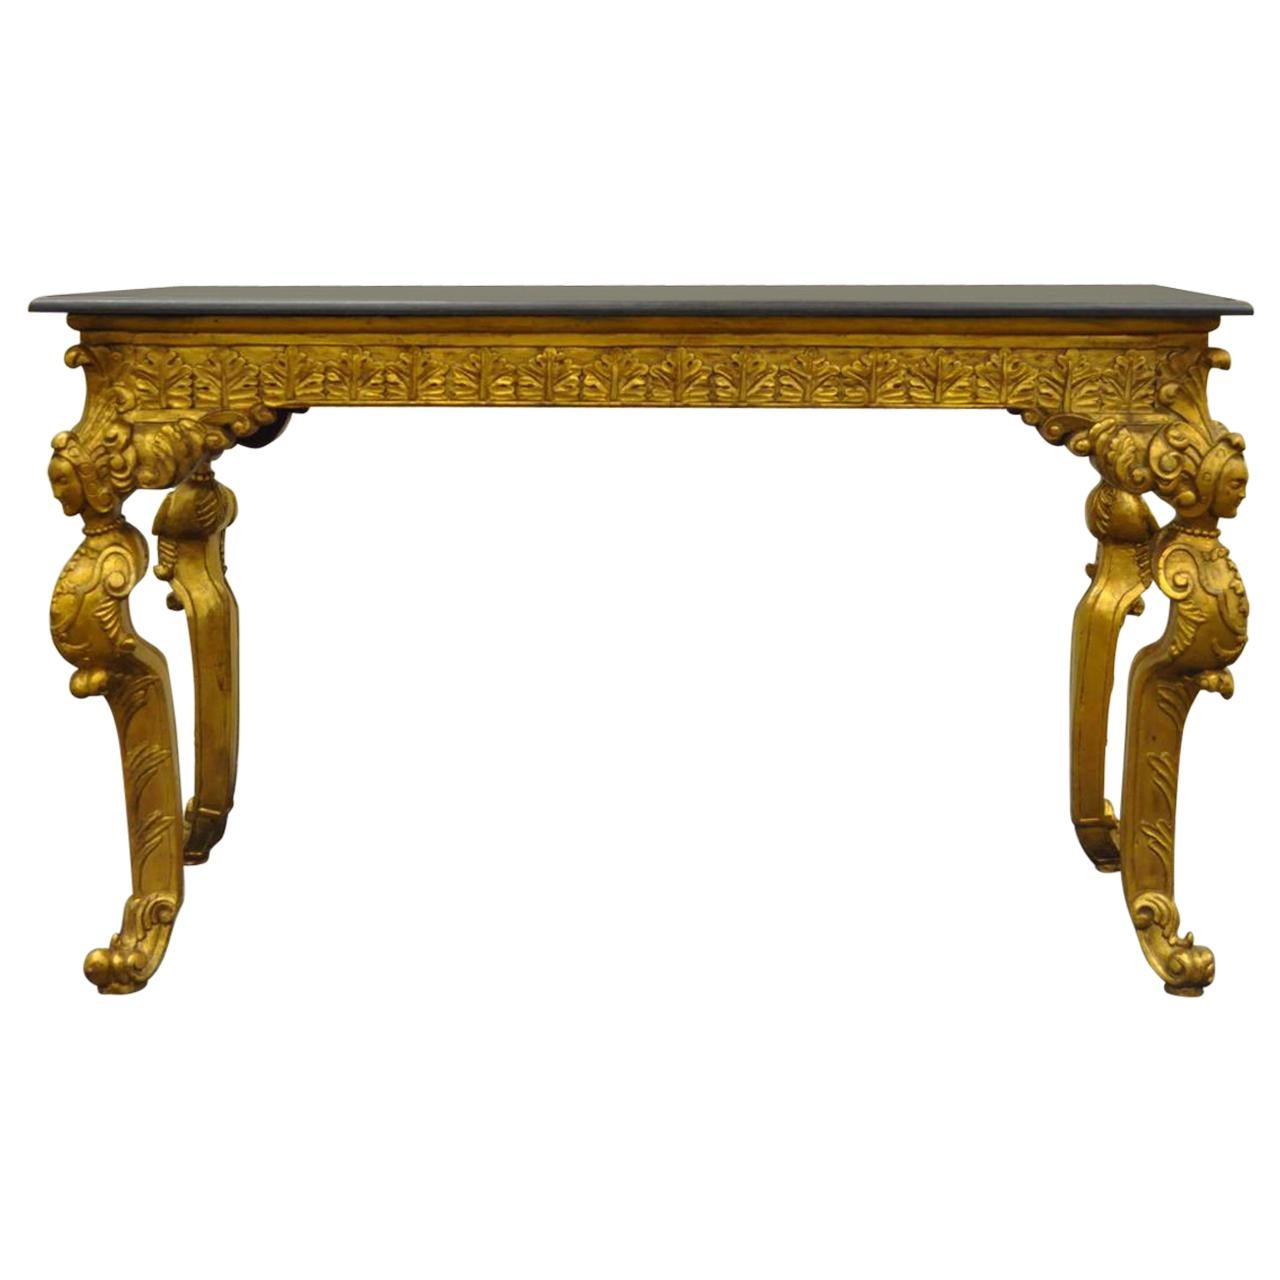 French Baroque Style Marble-Top Gold Gilt Figural Console Hall Table with Faces